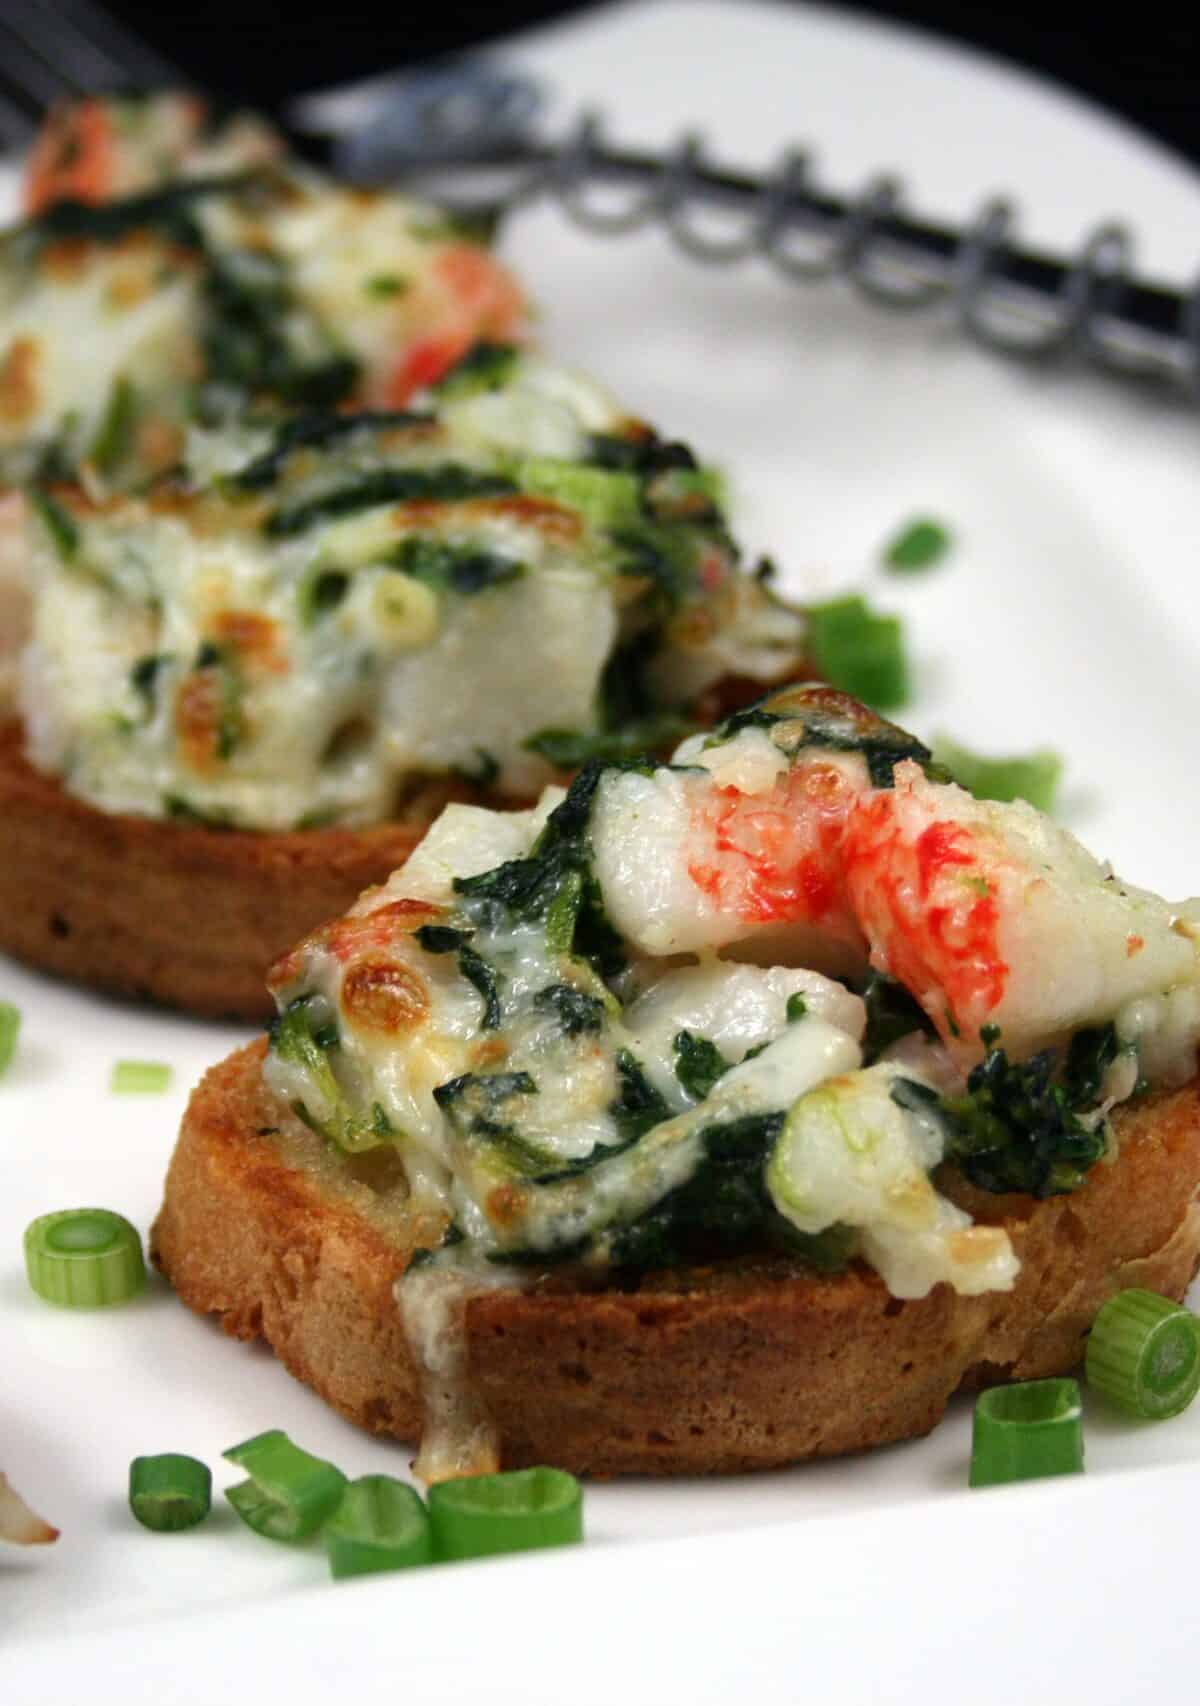 Mouthwatering Garlic Bread with Crab and Spinach Recipe.